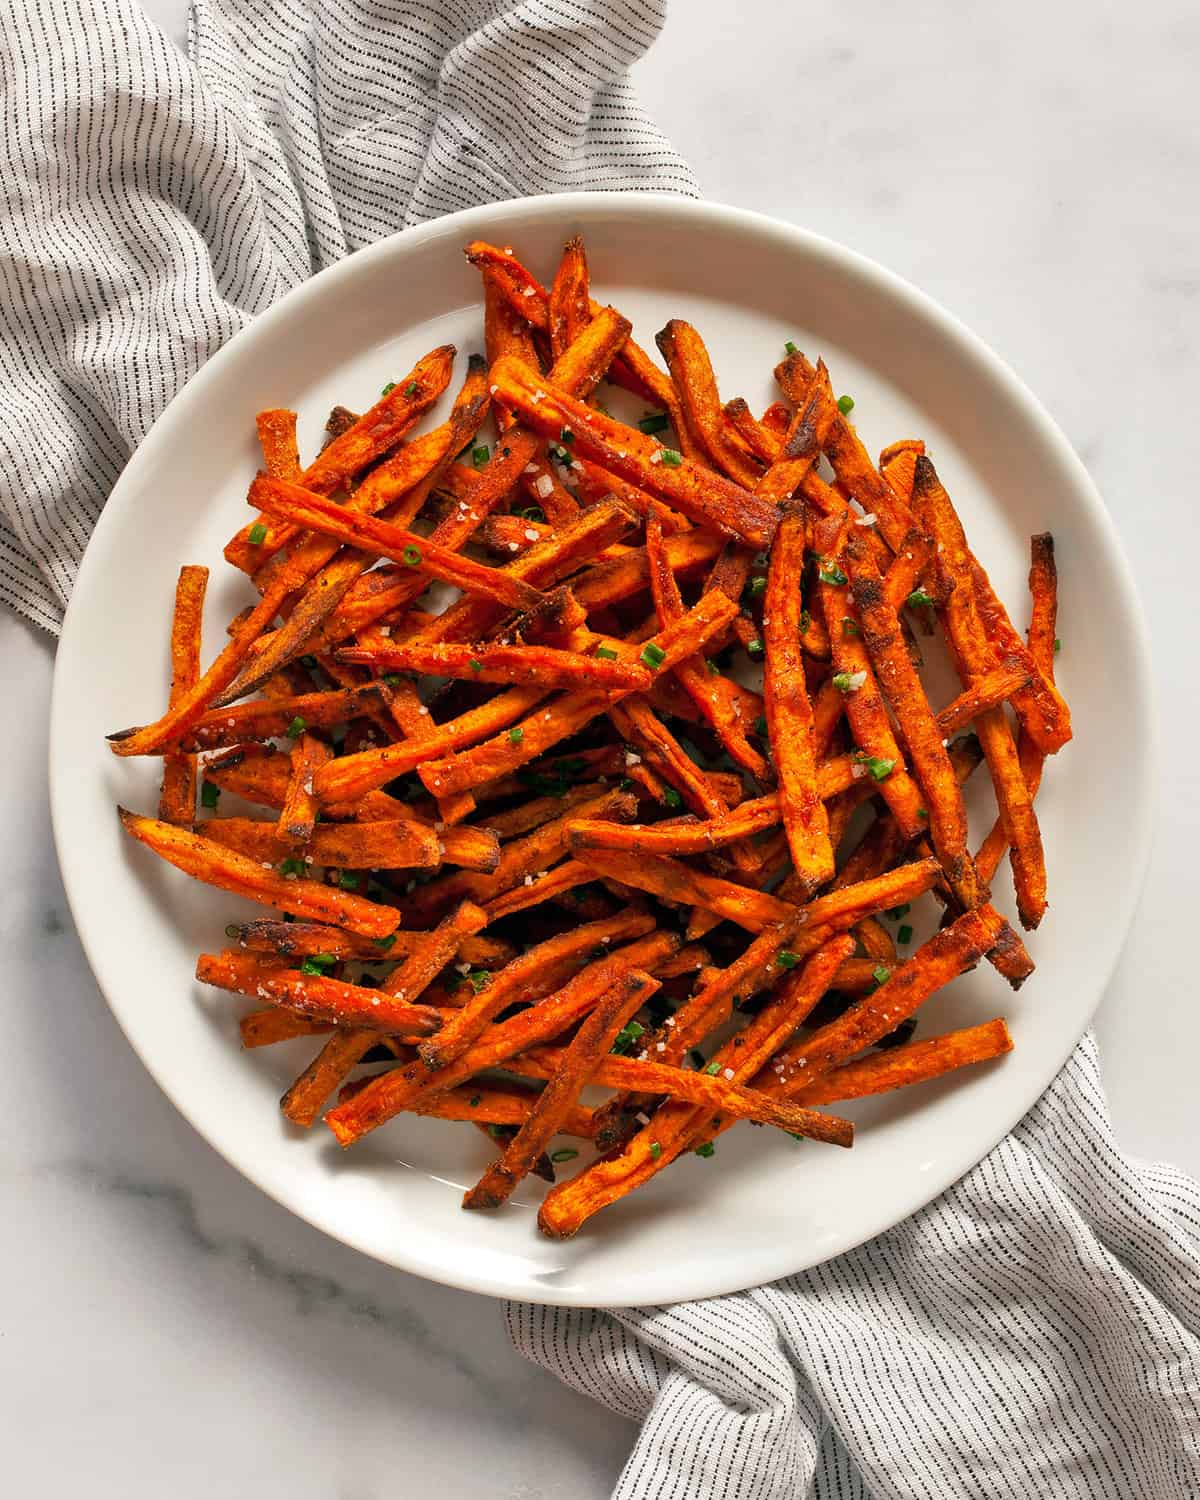 Oven baked sweet potato fries on a plate.